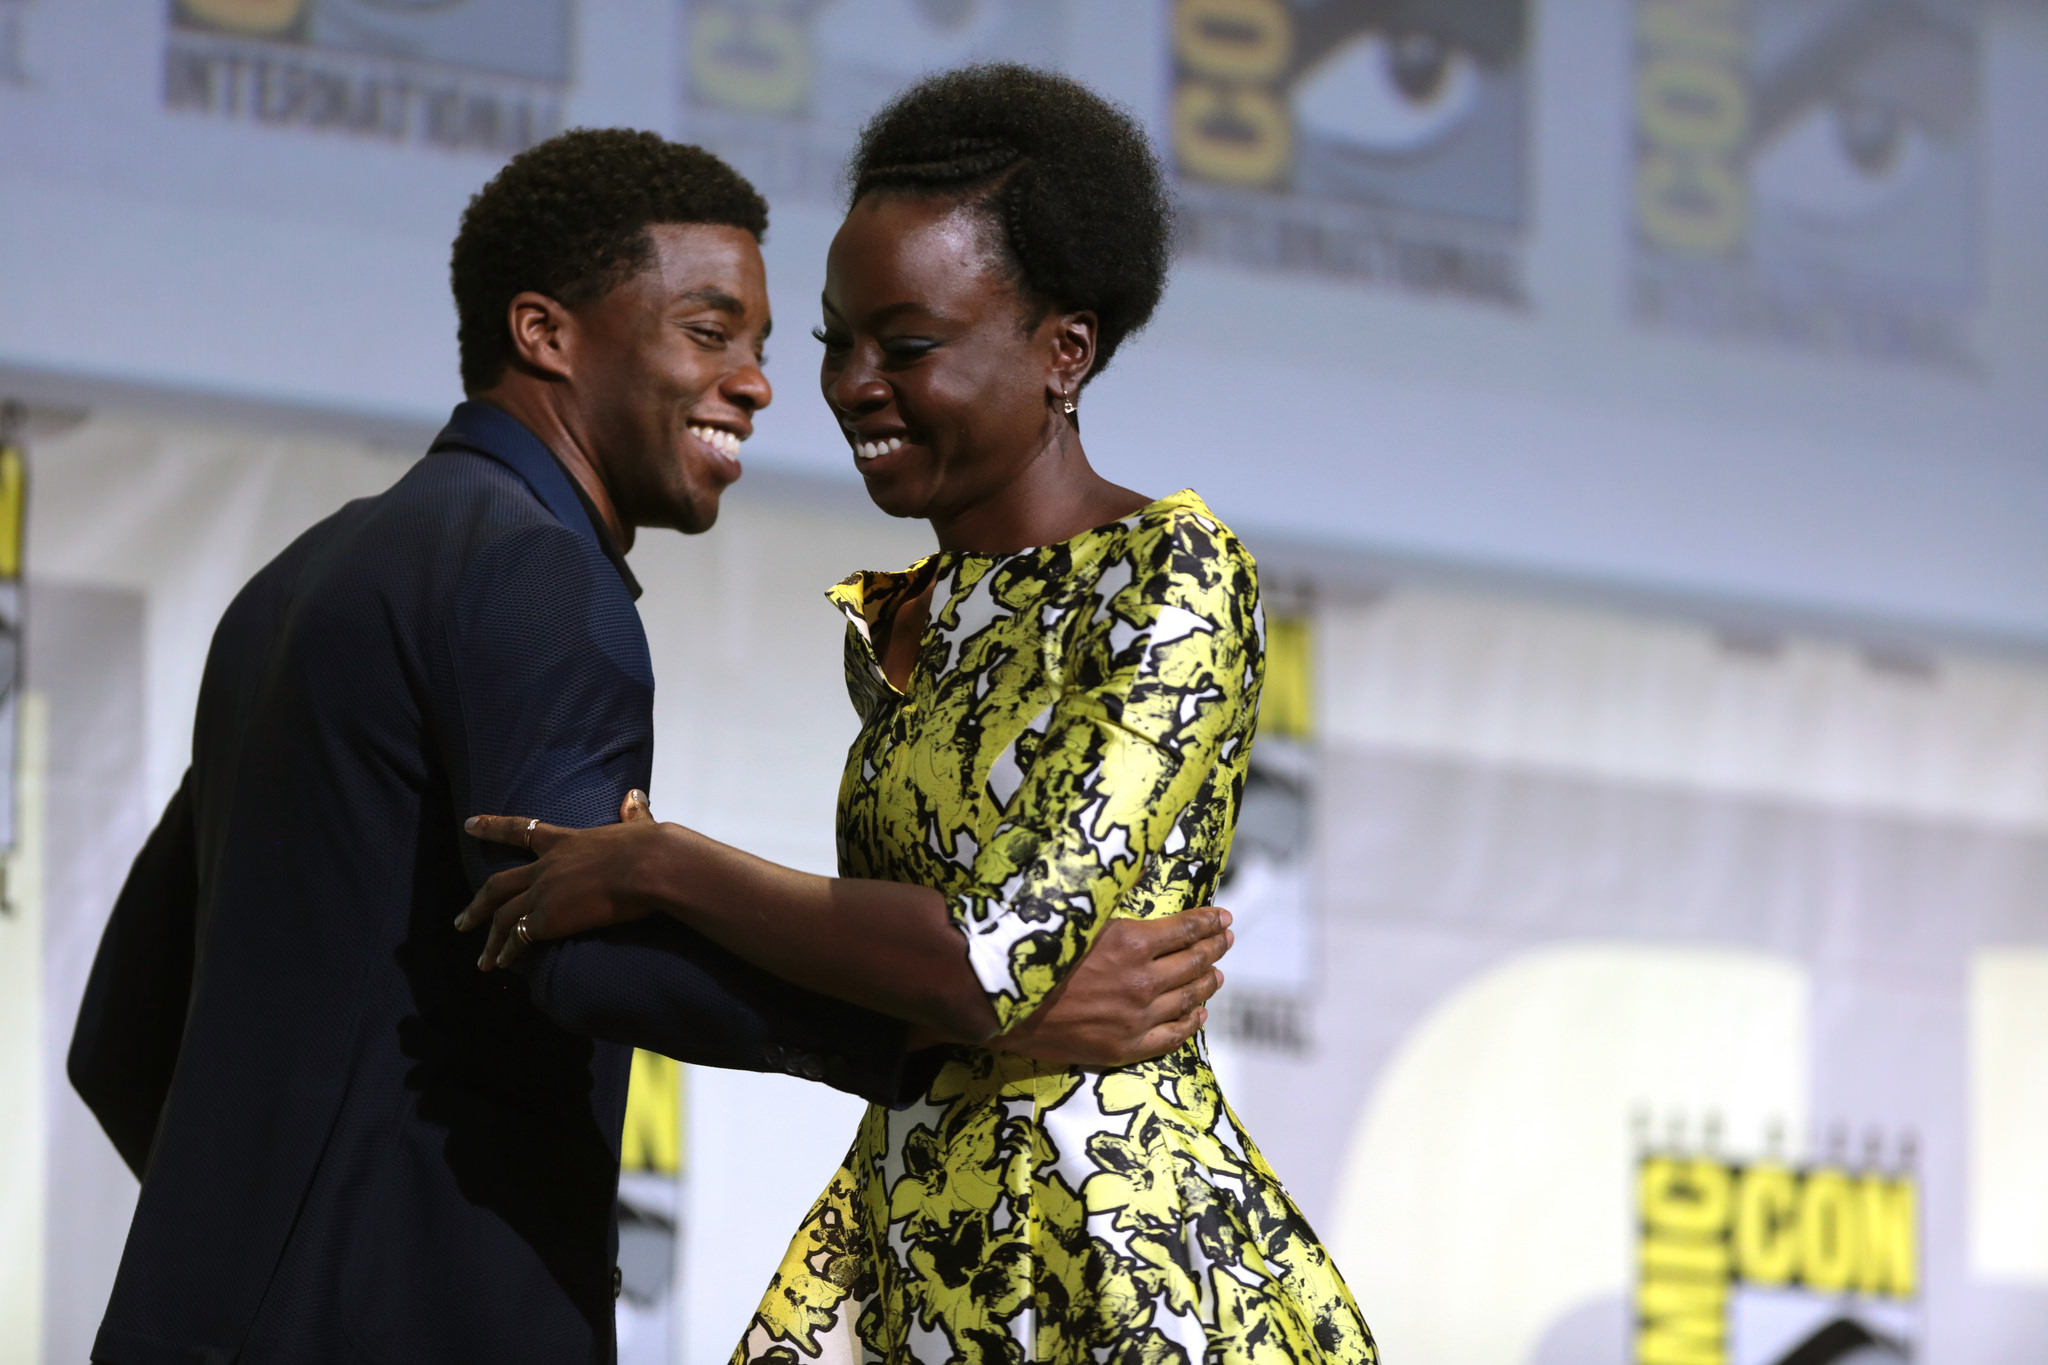 Black Panther Disembarks From The Roles Black Actors Have Traditionally Been Pigeonholed Into